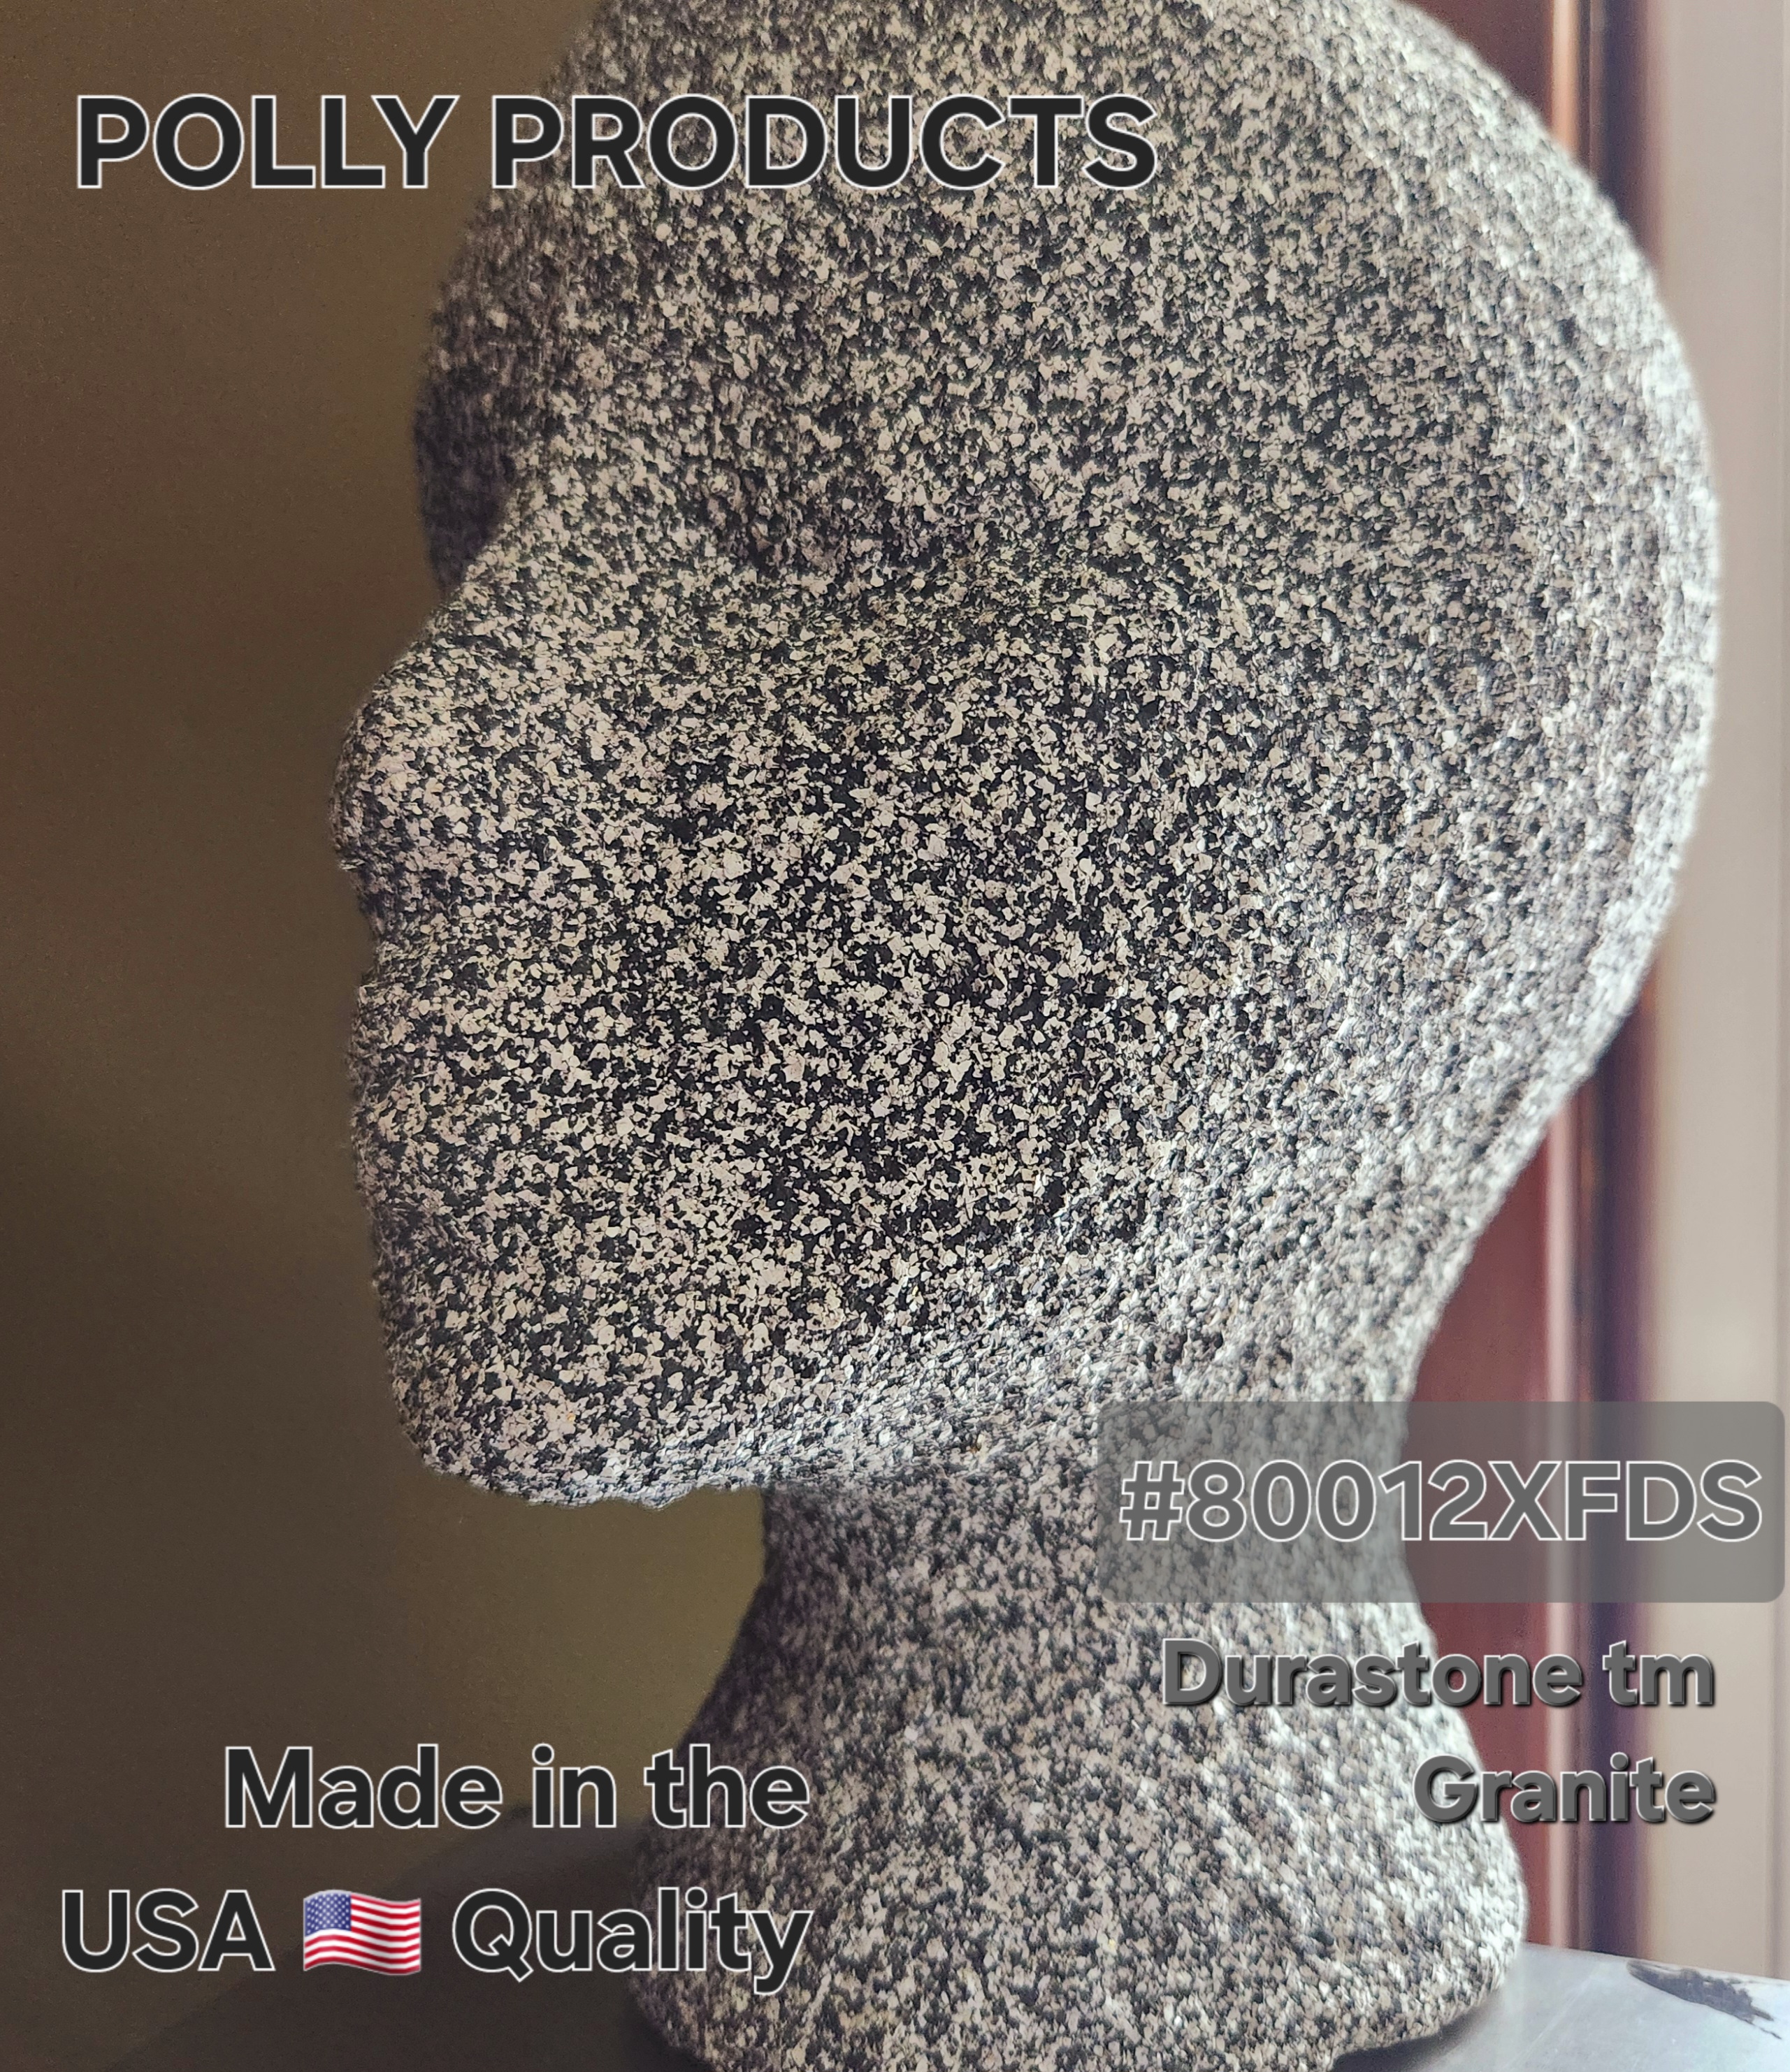 Polly Products 80012XFDS 10 in. Durastone tm Mannequin Head Form. Granite. MADE IN THE USA 🇺🇸 QUALITY 